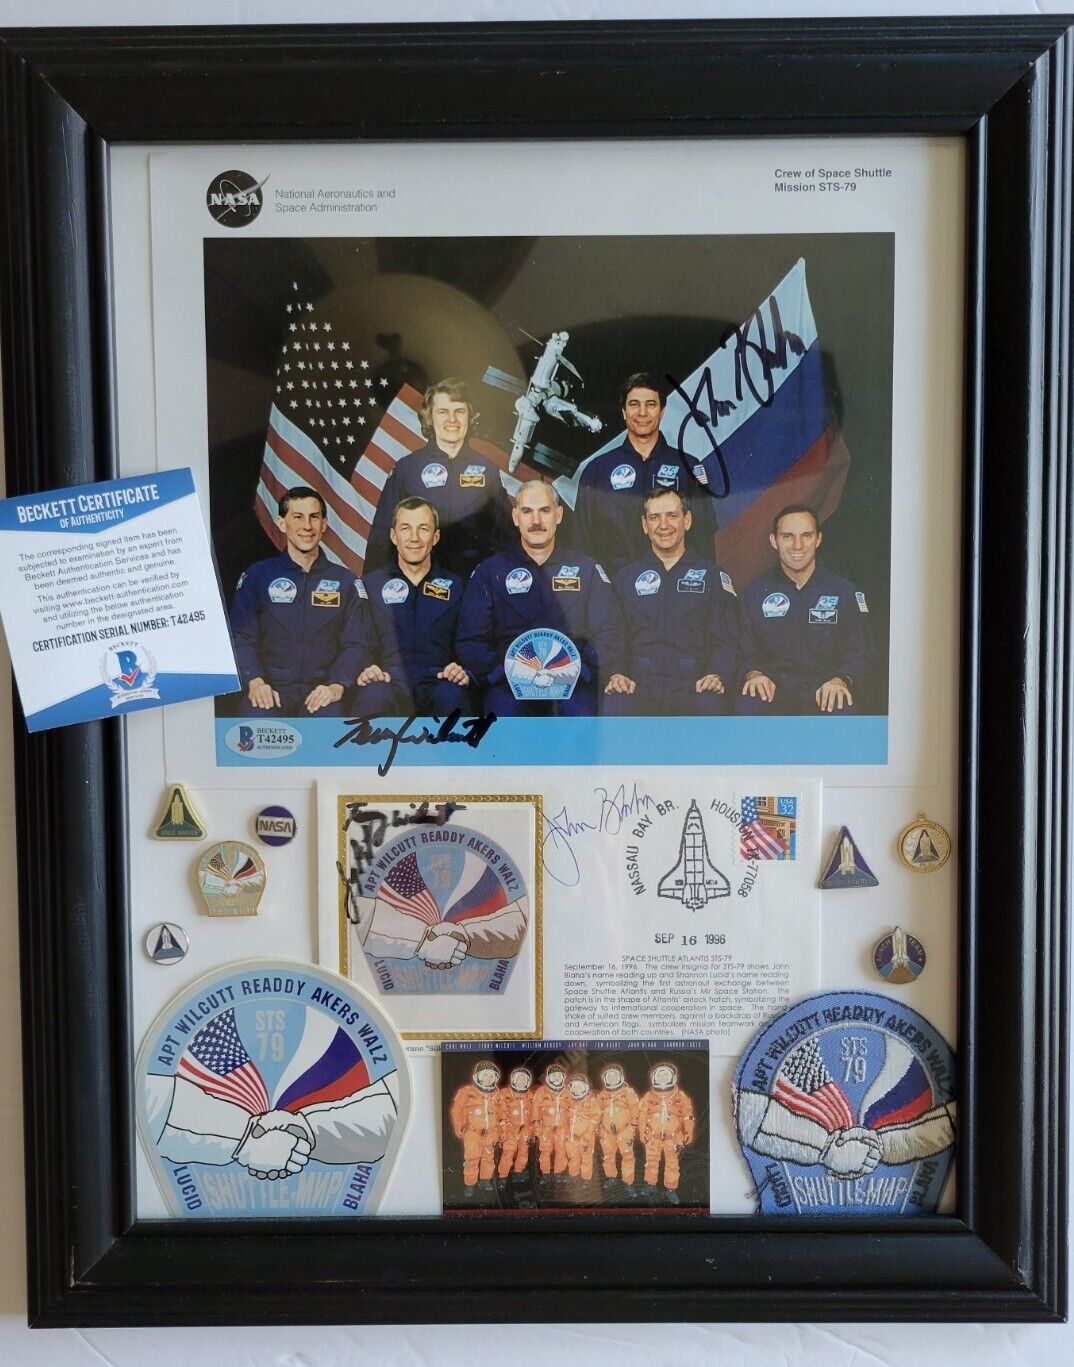 STS-79 NASA Space Shuttle ATLANTIS 1996 Framed Display AUTOGRAPHED 5X's BECKETT